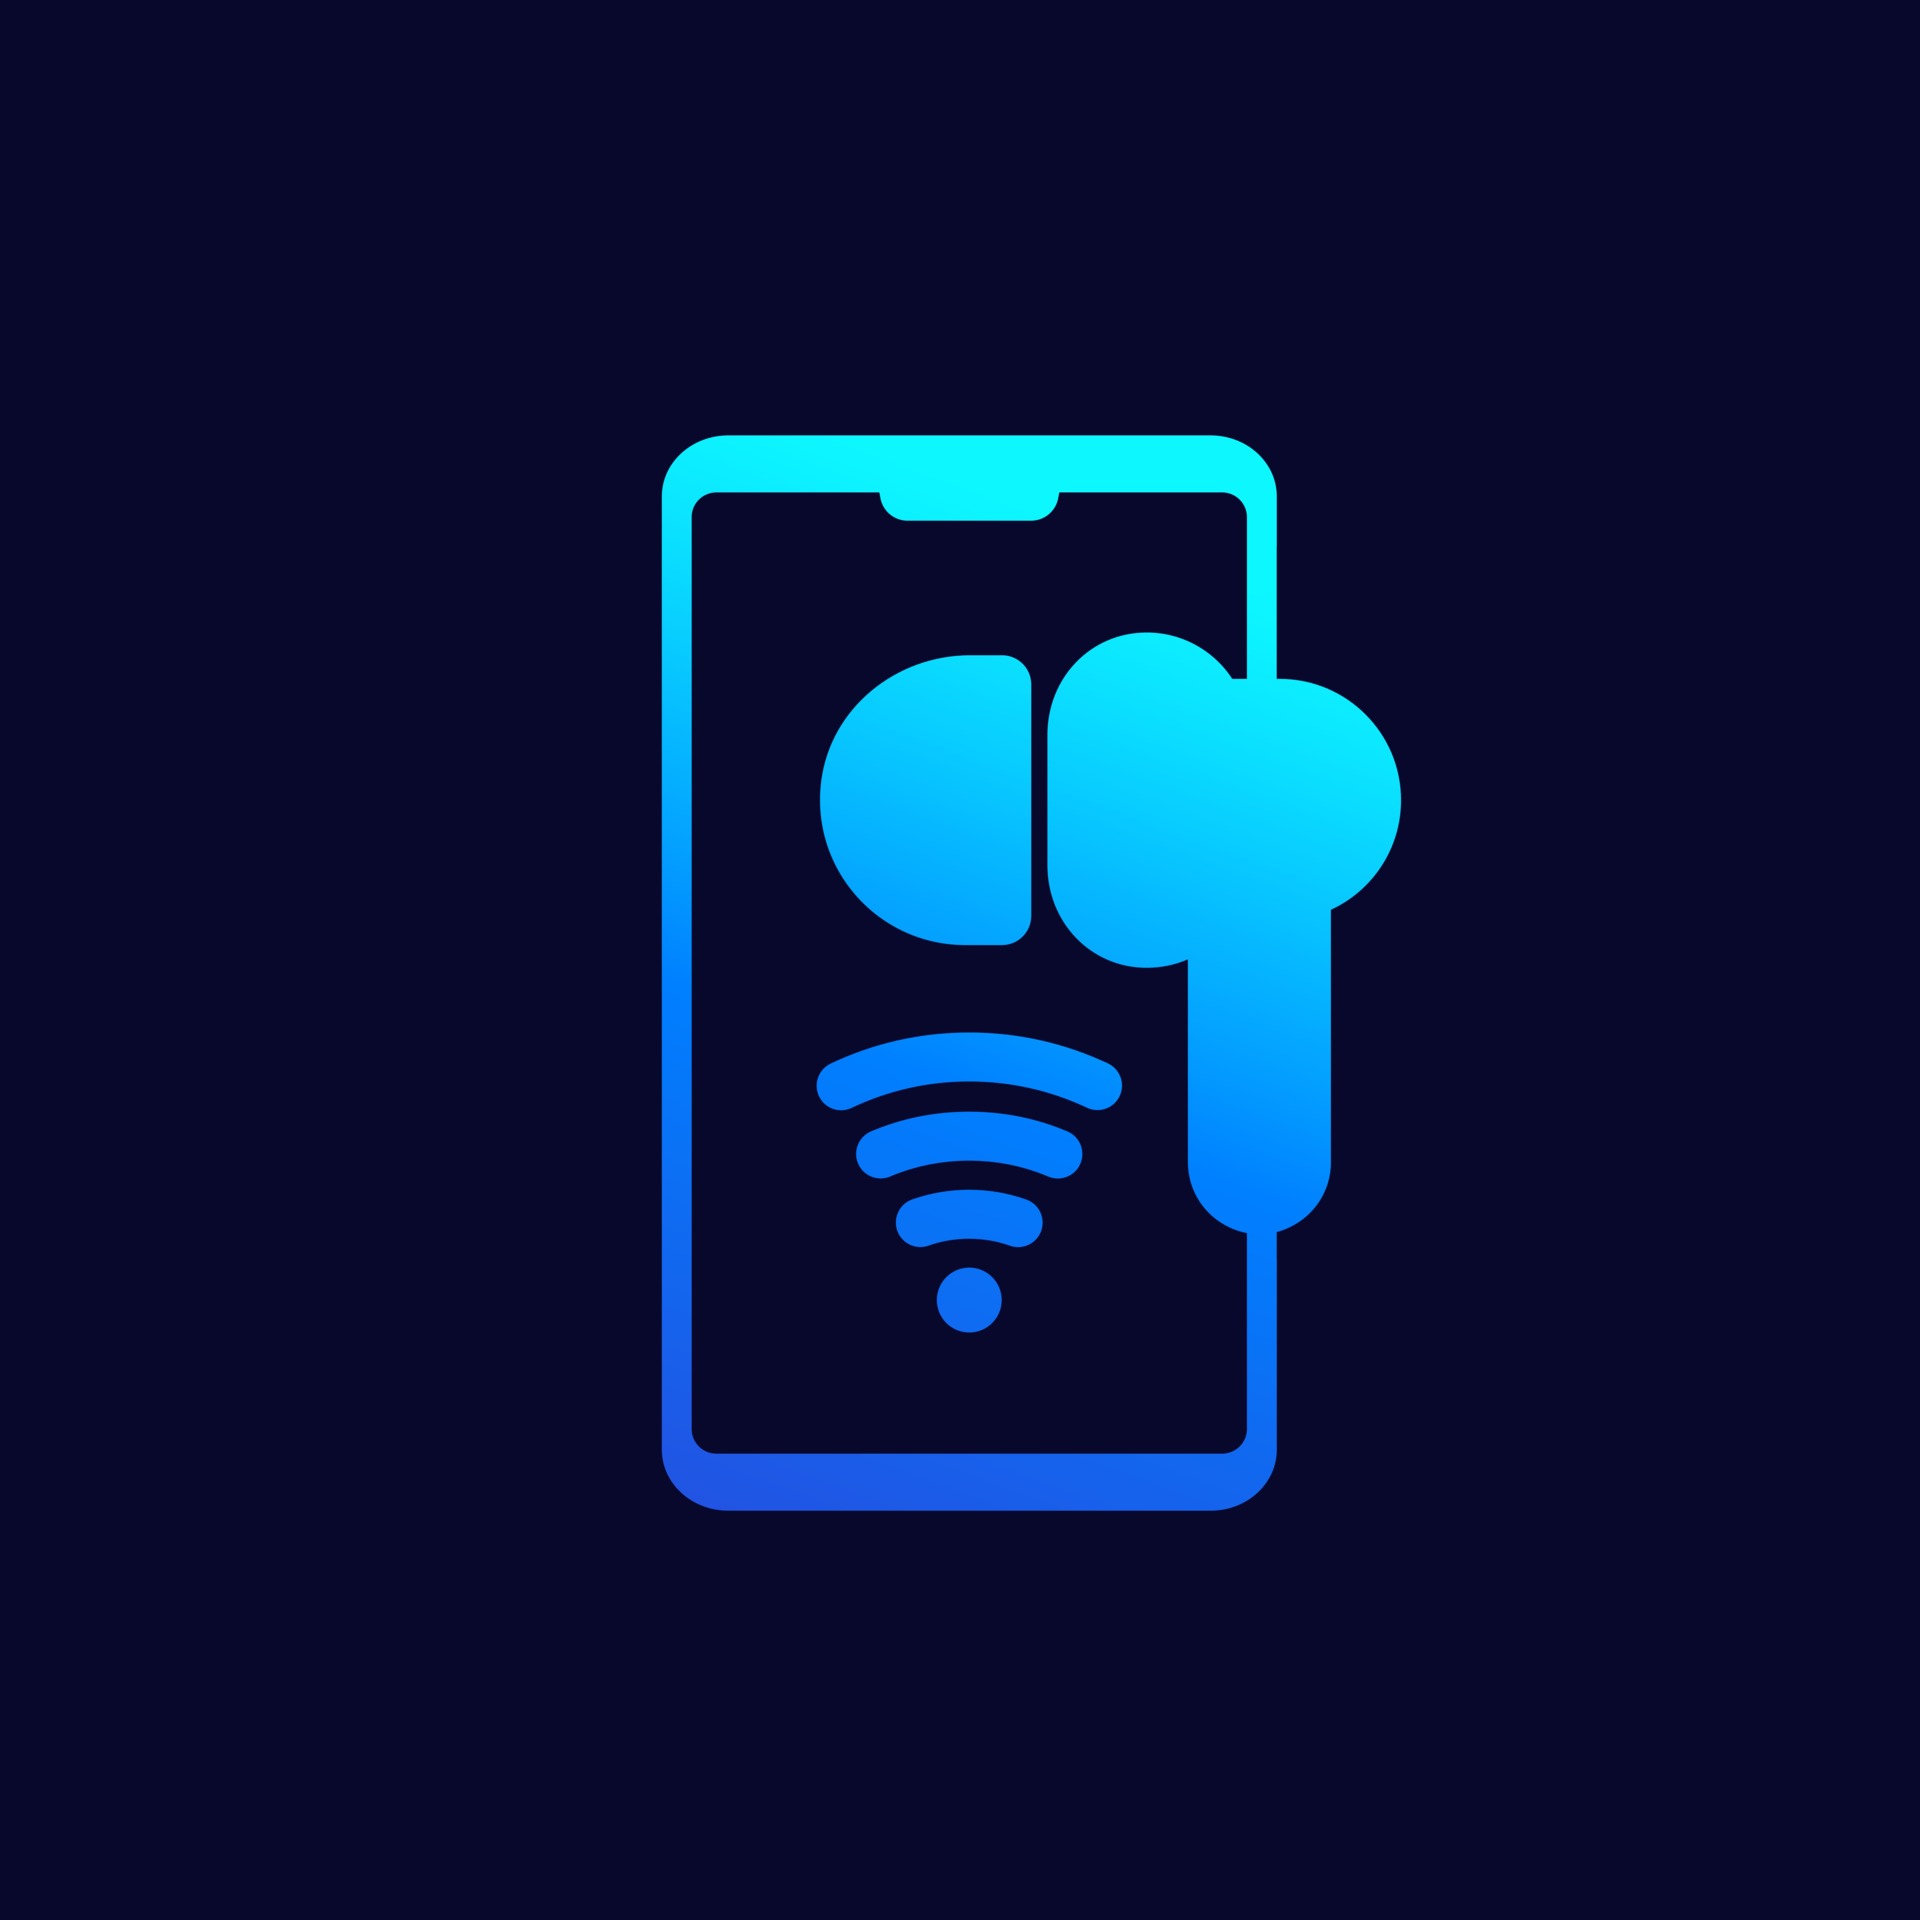 Ear buds, wireless headphones connecting to phone icon